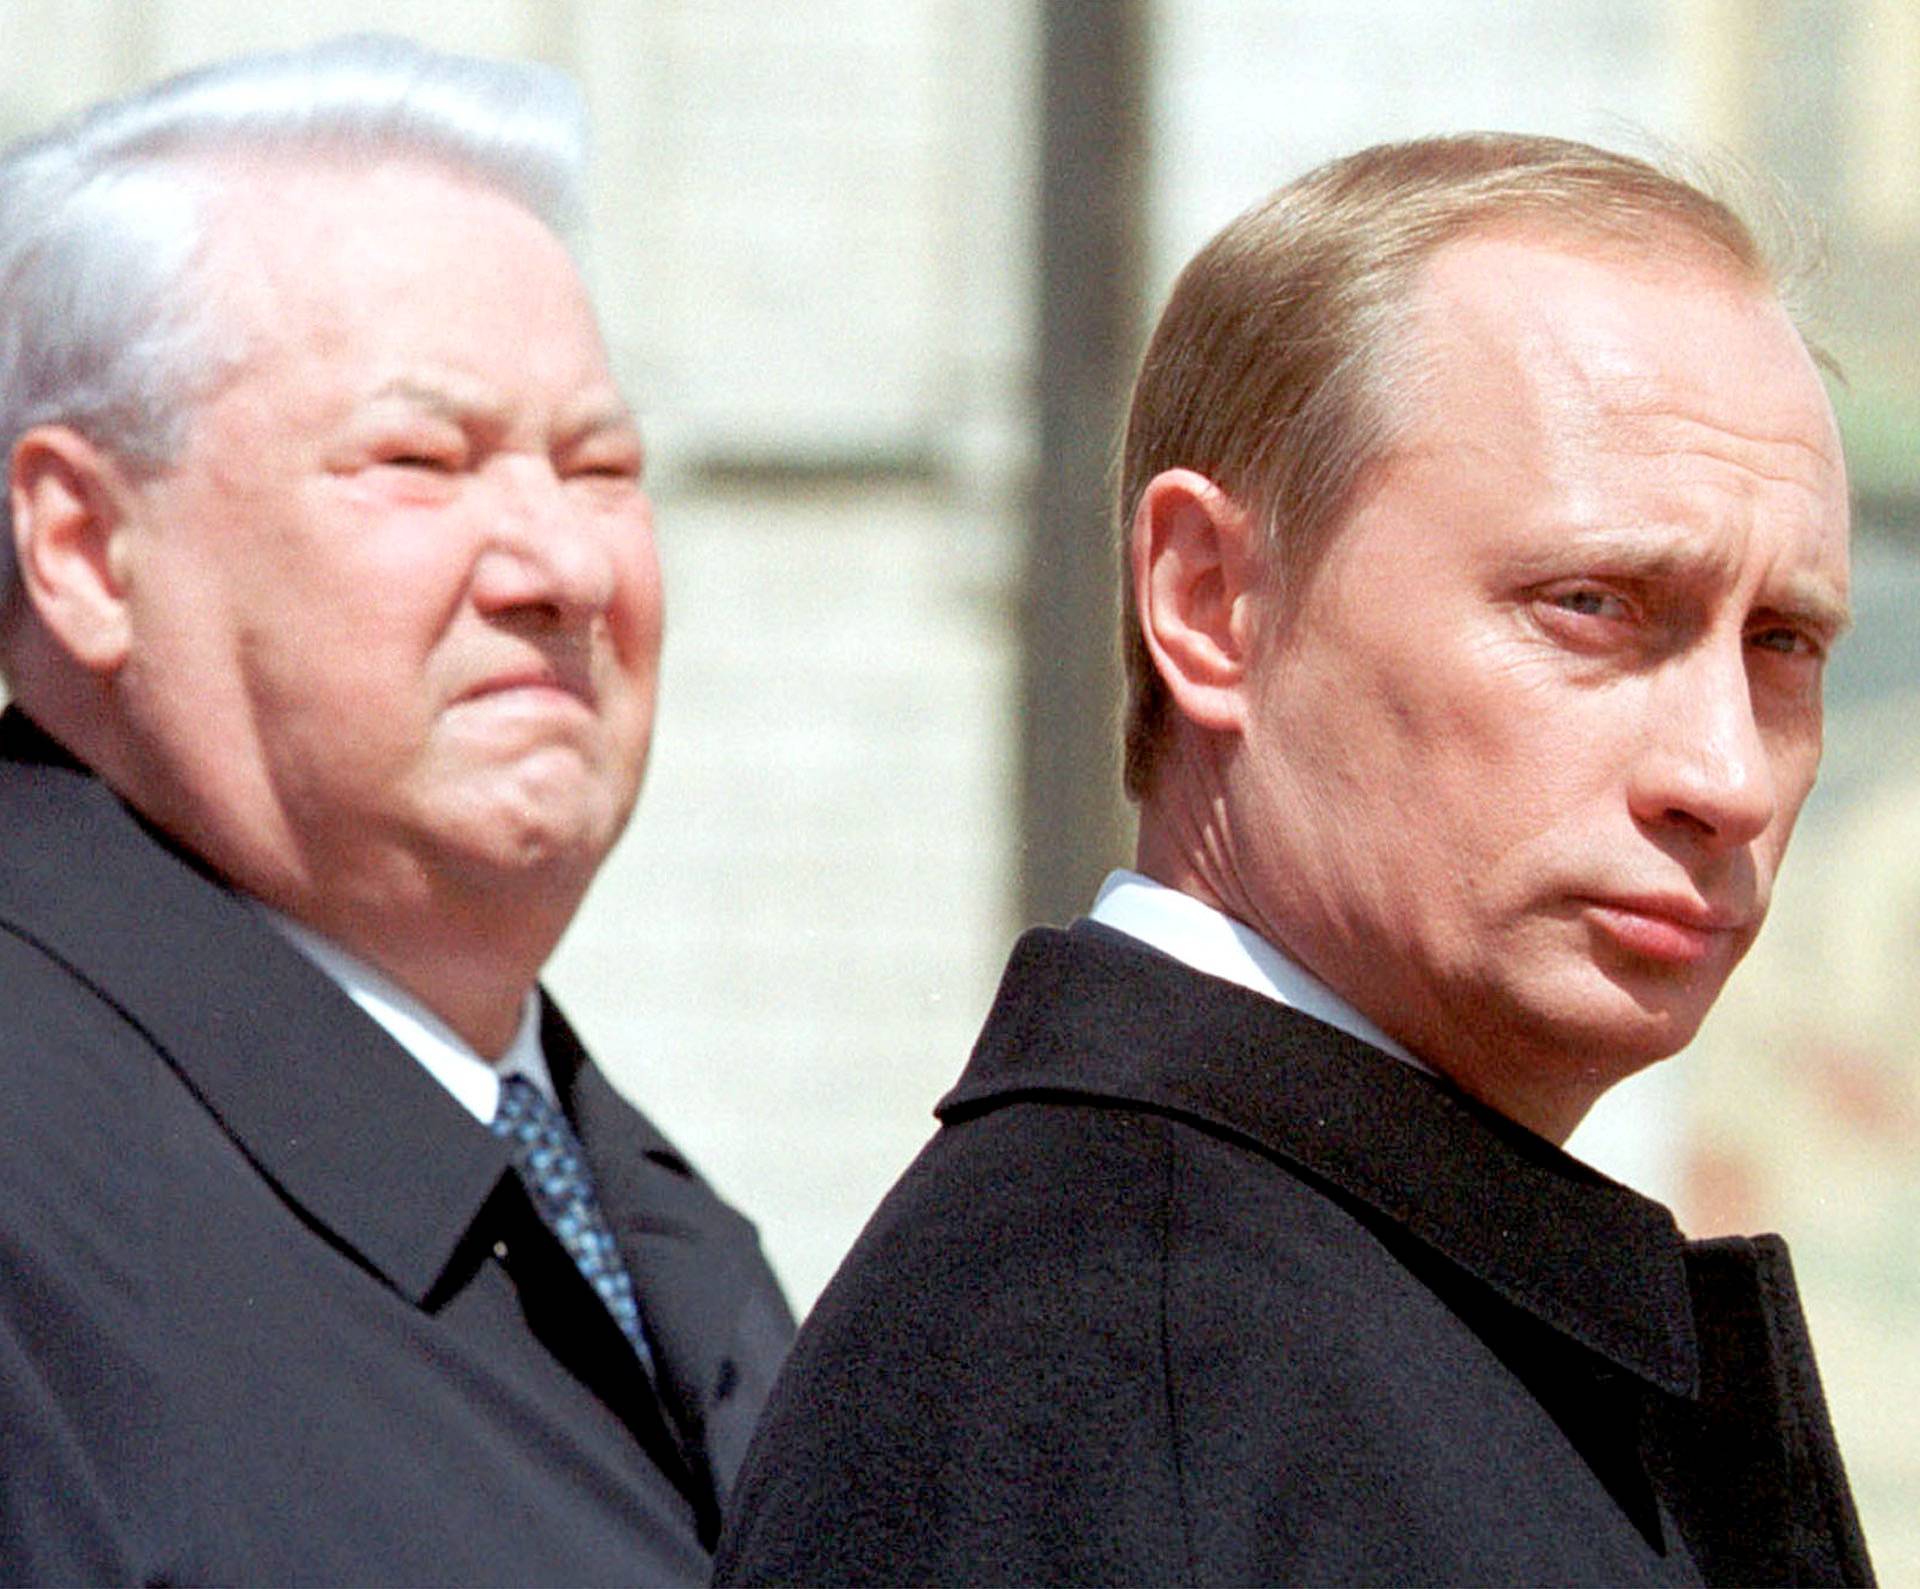 FILE PHOTO: The first Russian president Boris Yeltsin (L) stands with President Vladimir Putin